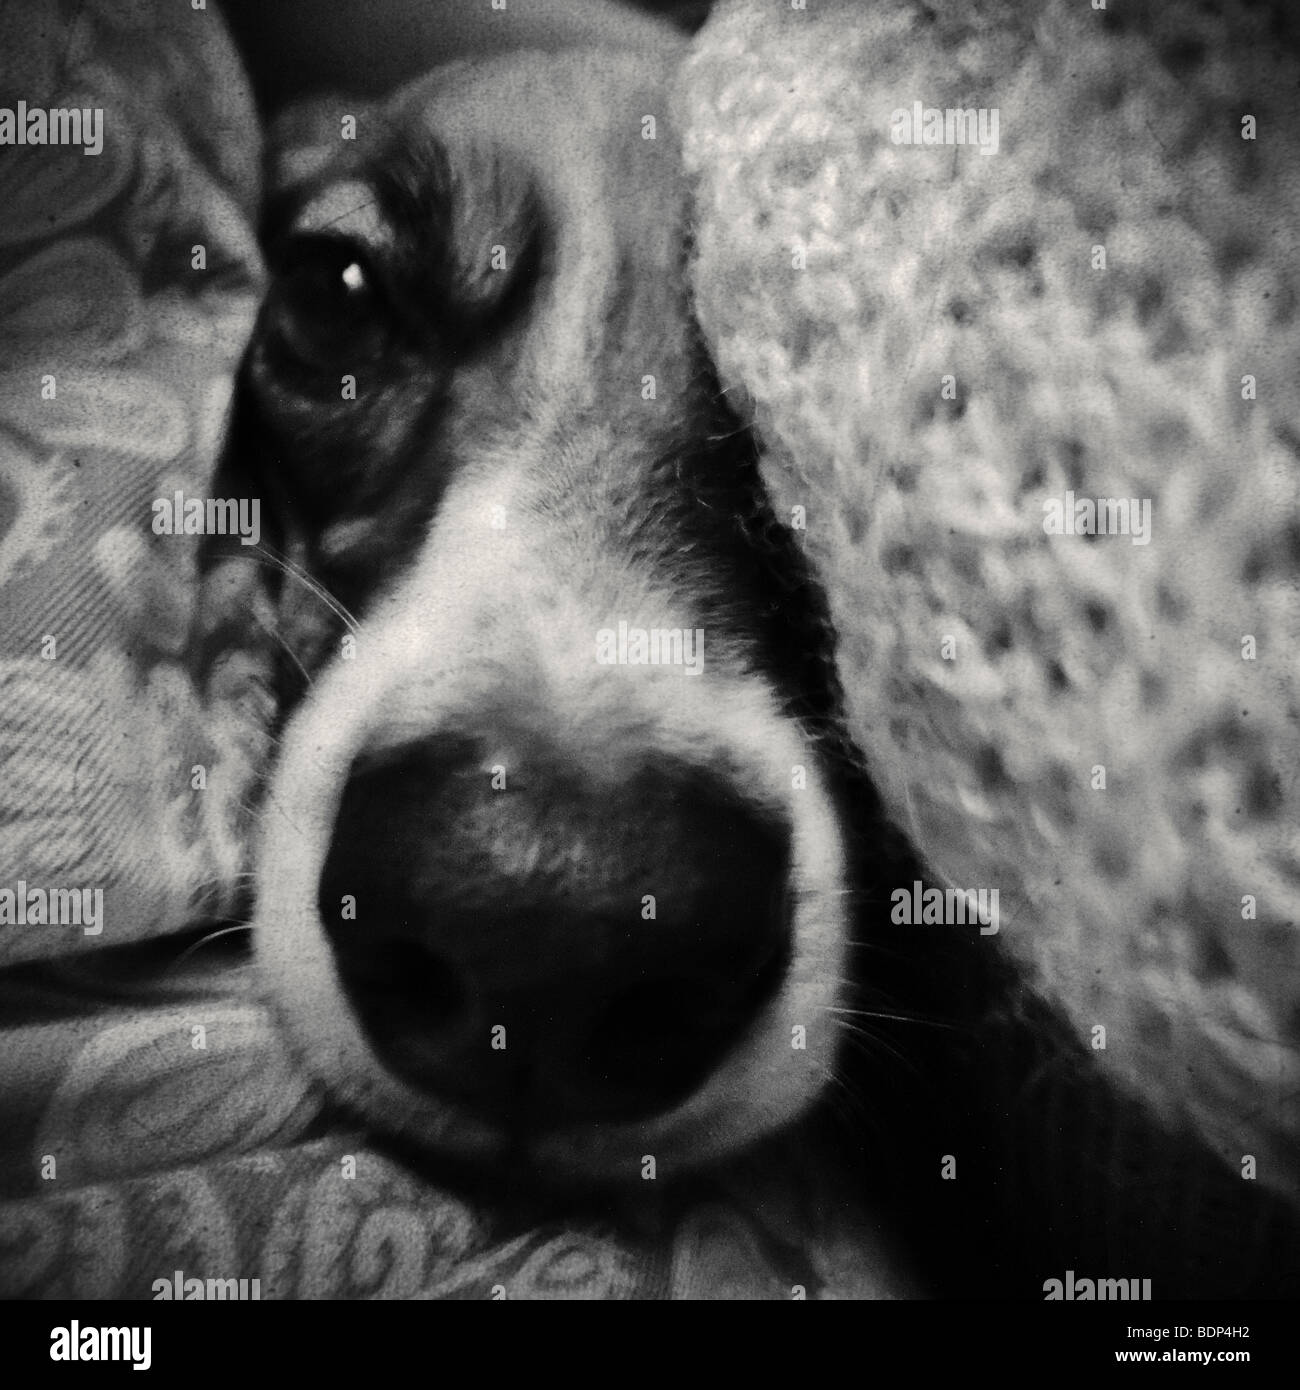 Close up portrait of a dog face Stock Photo